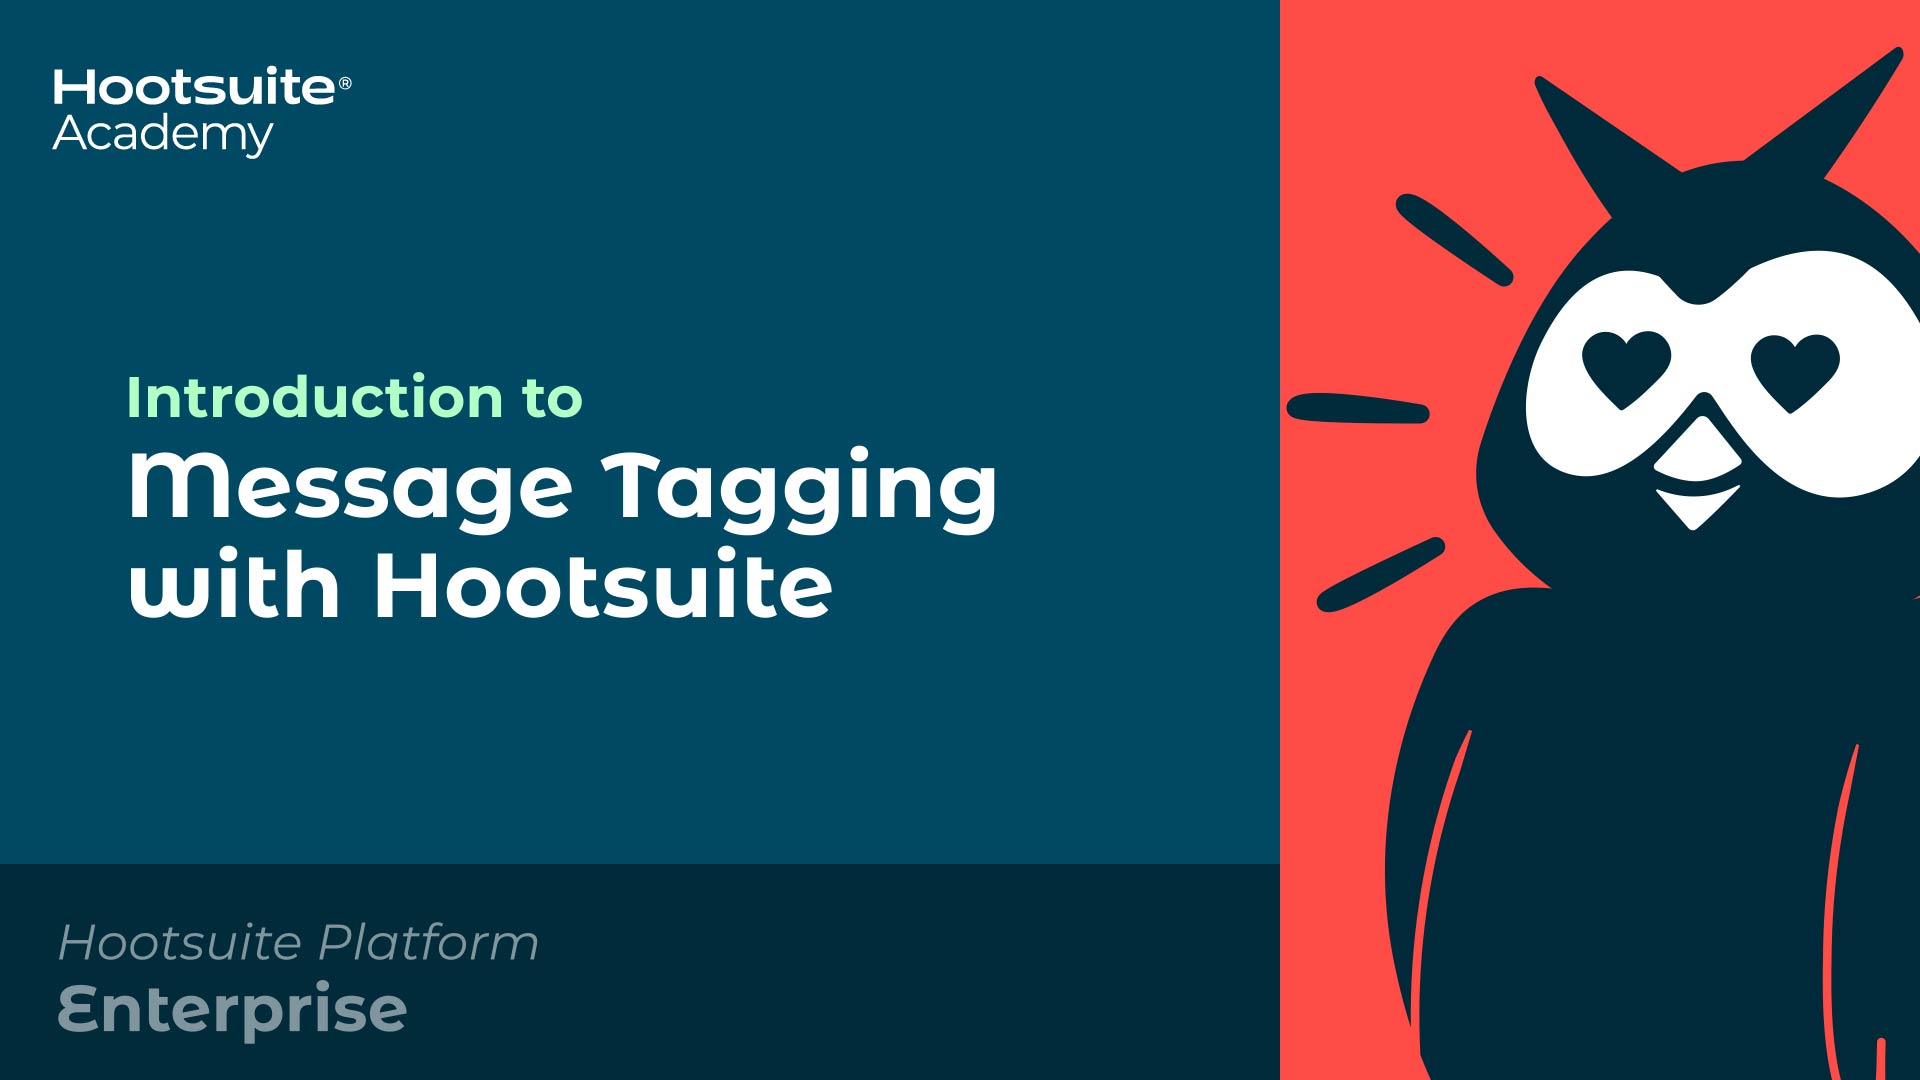 Introduction to message tagging with Hootsuite video.